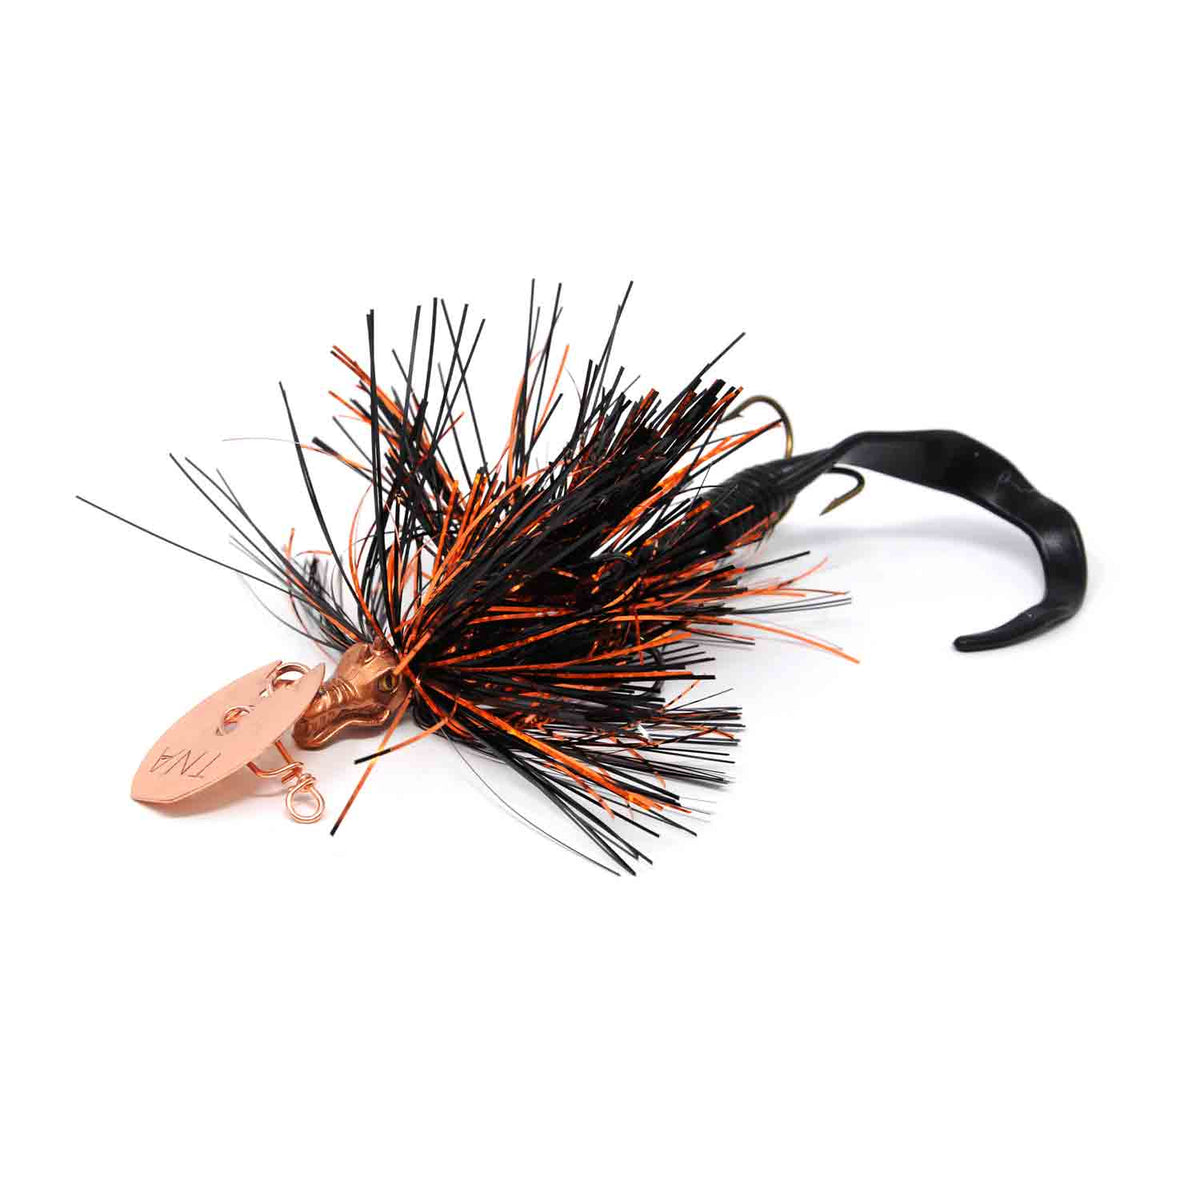 ZMAN Micro Chatterbaits from Predator Tackle